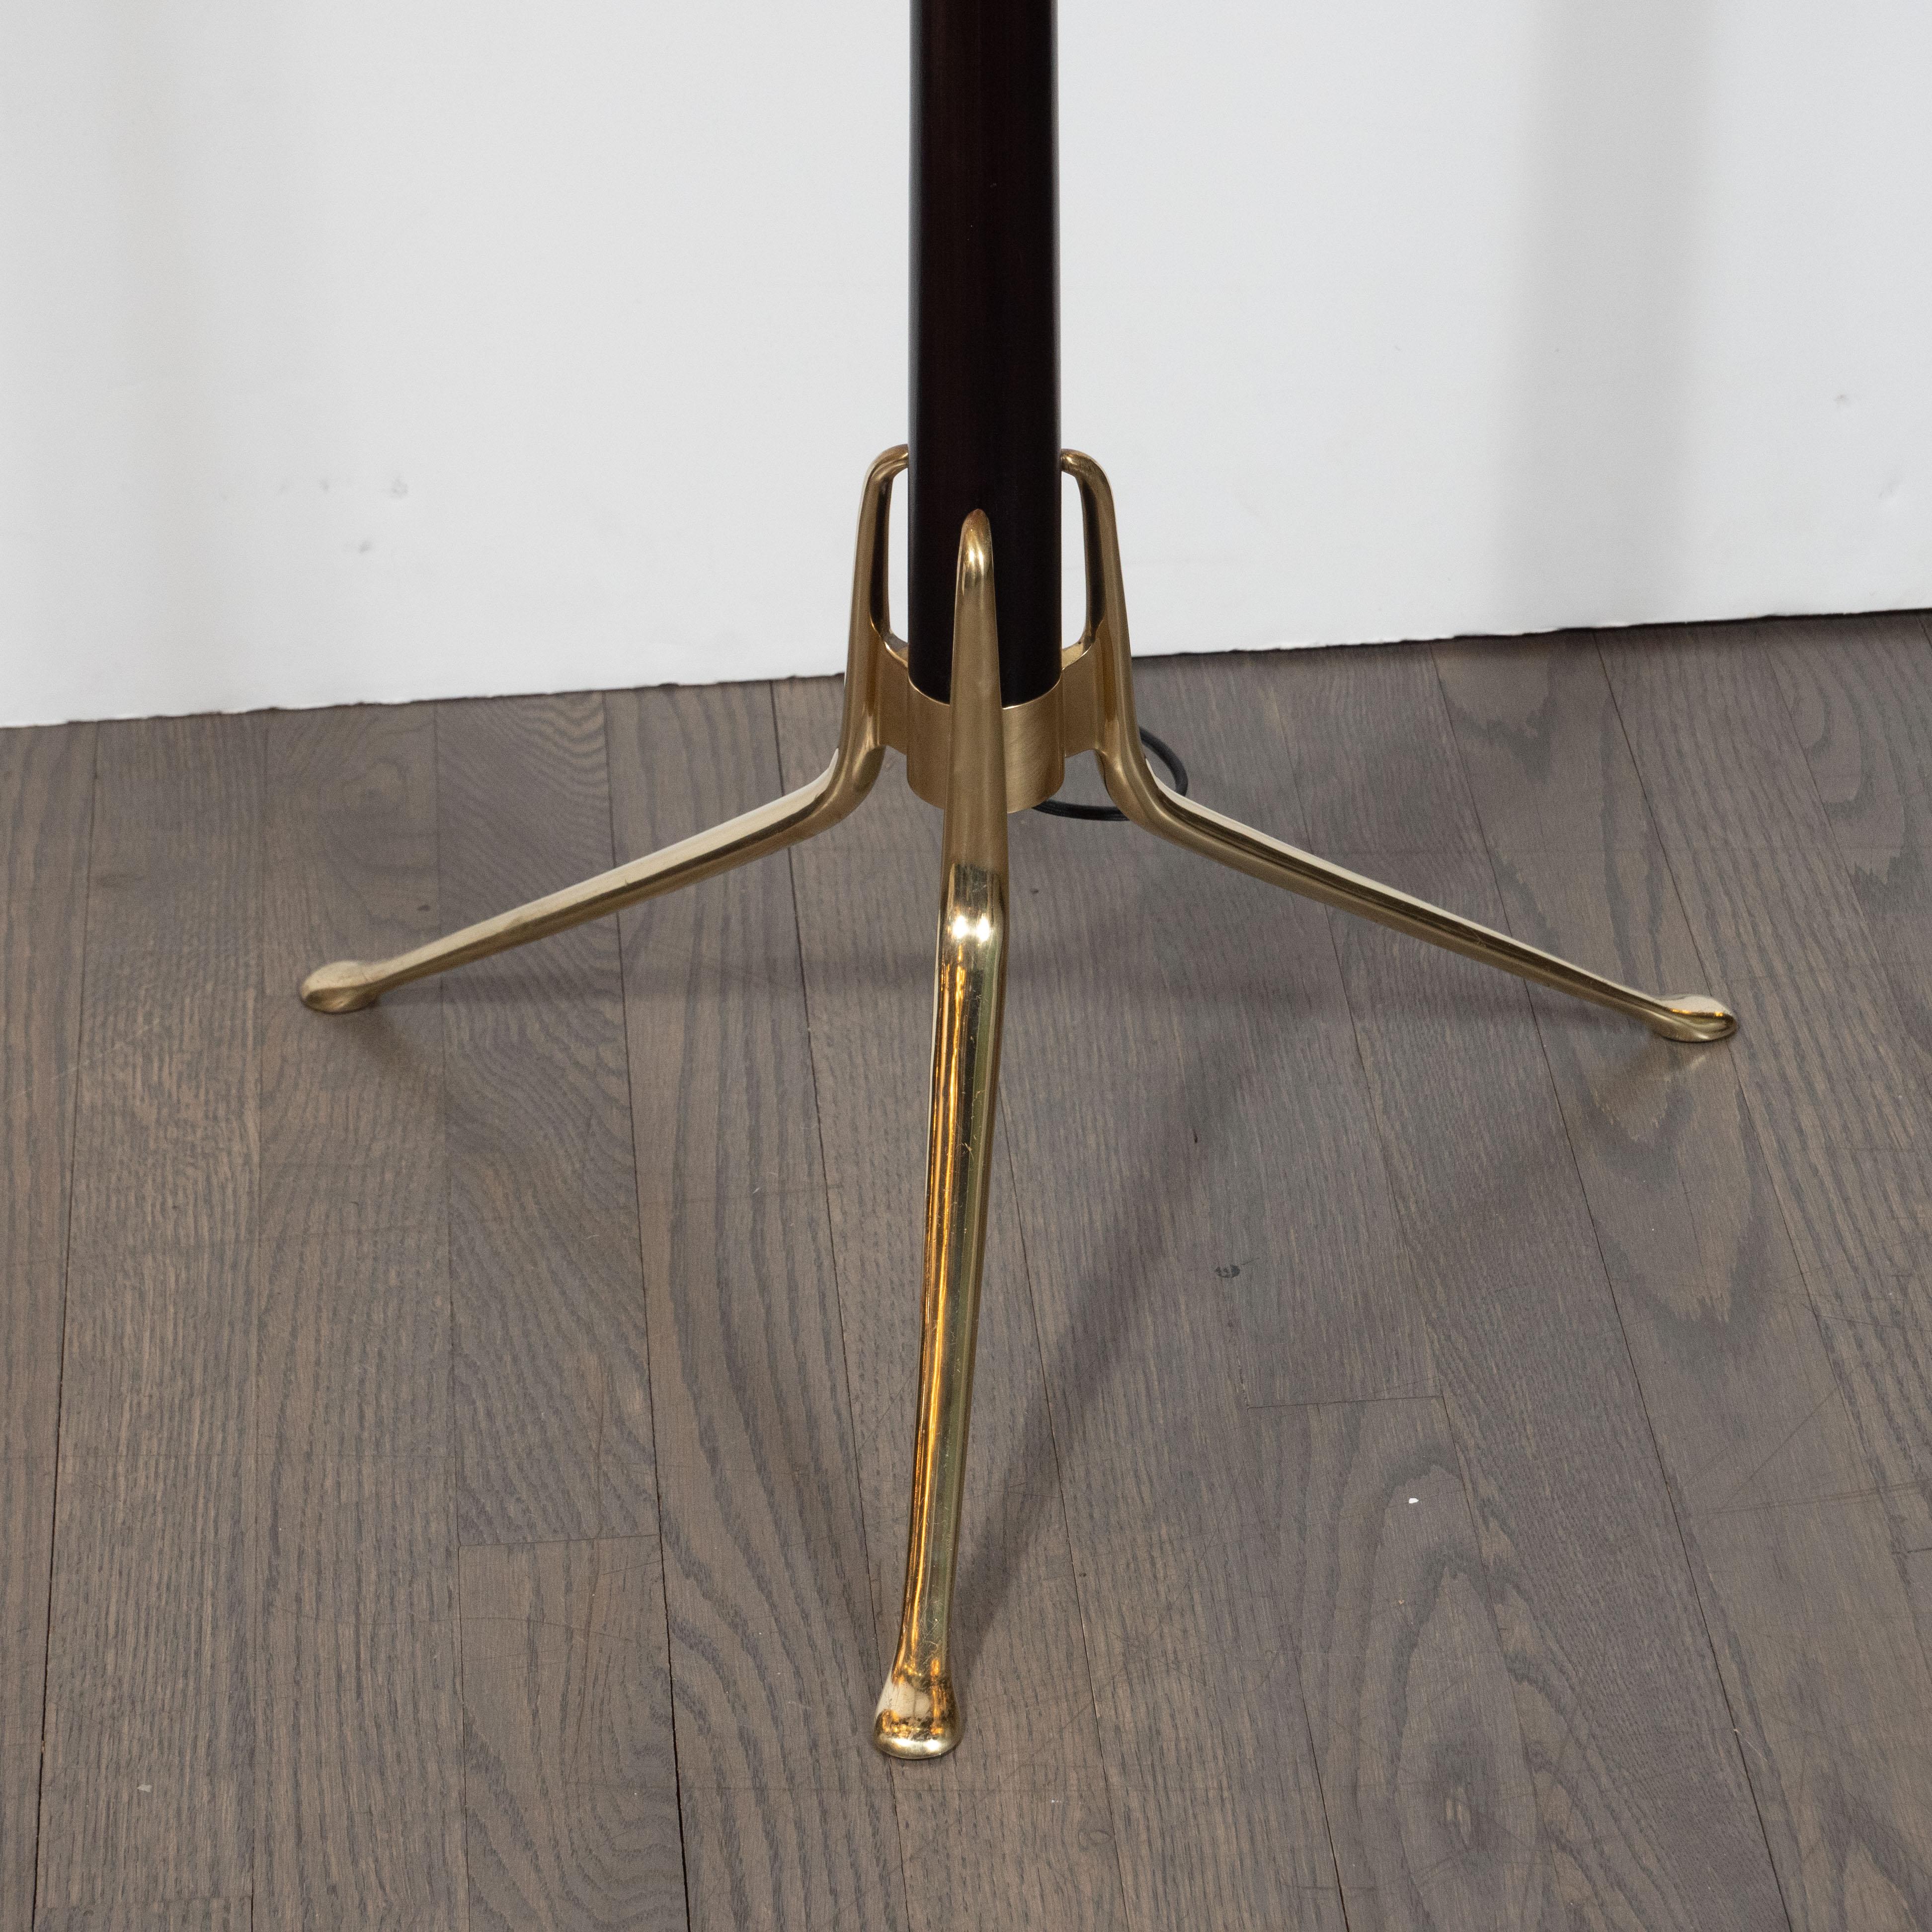 This stunning and sculptural Mid-Century Modern floor lamp was realized by the esteemed designer, Gerald Thurston, in the United States, circa 1950. It features sculptural brass legs that extend from the ebonized body of the fixture at an angle